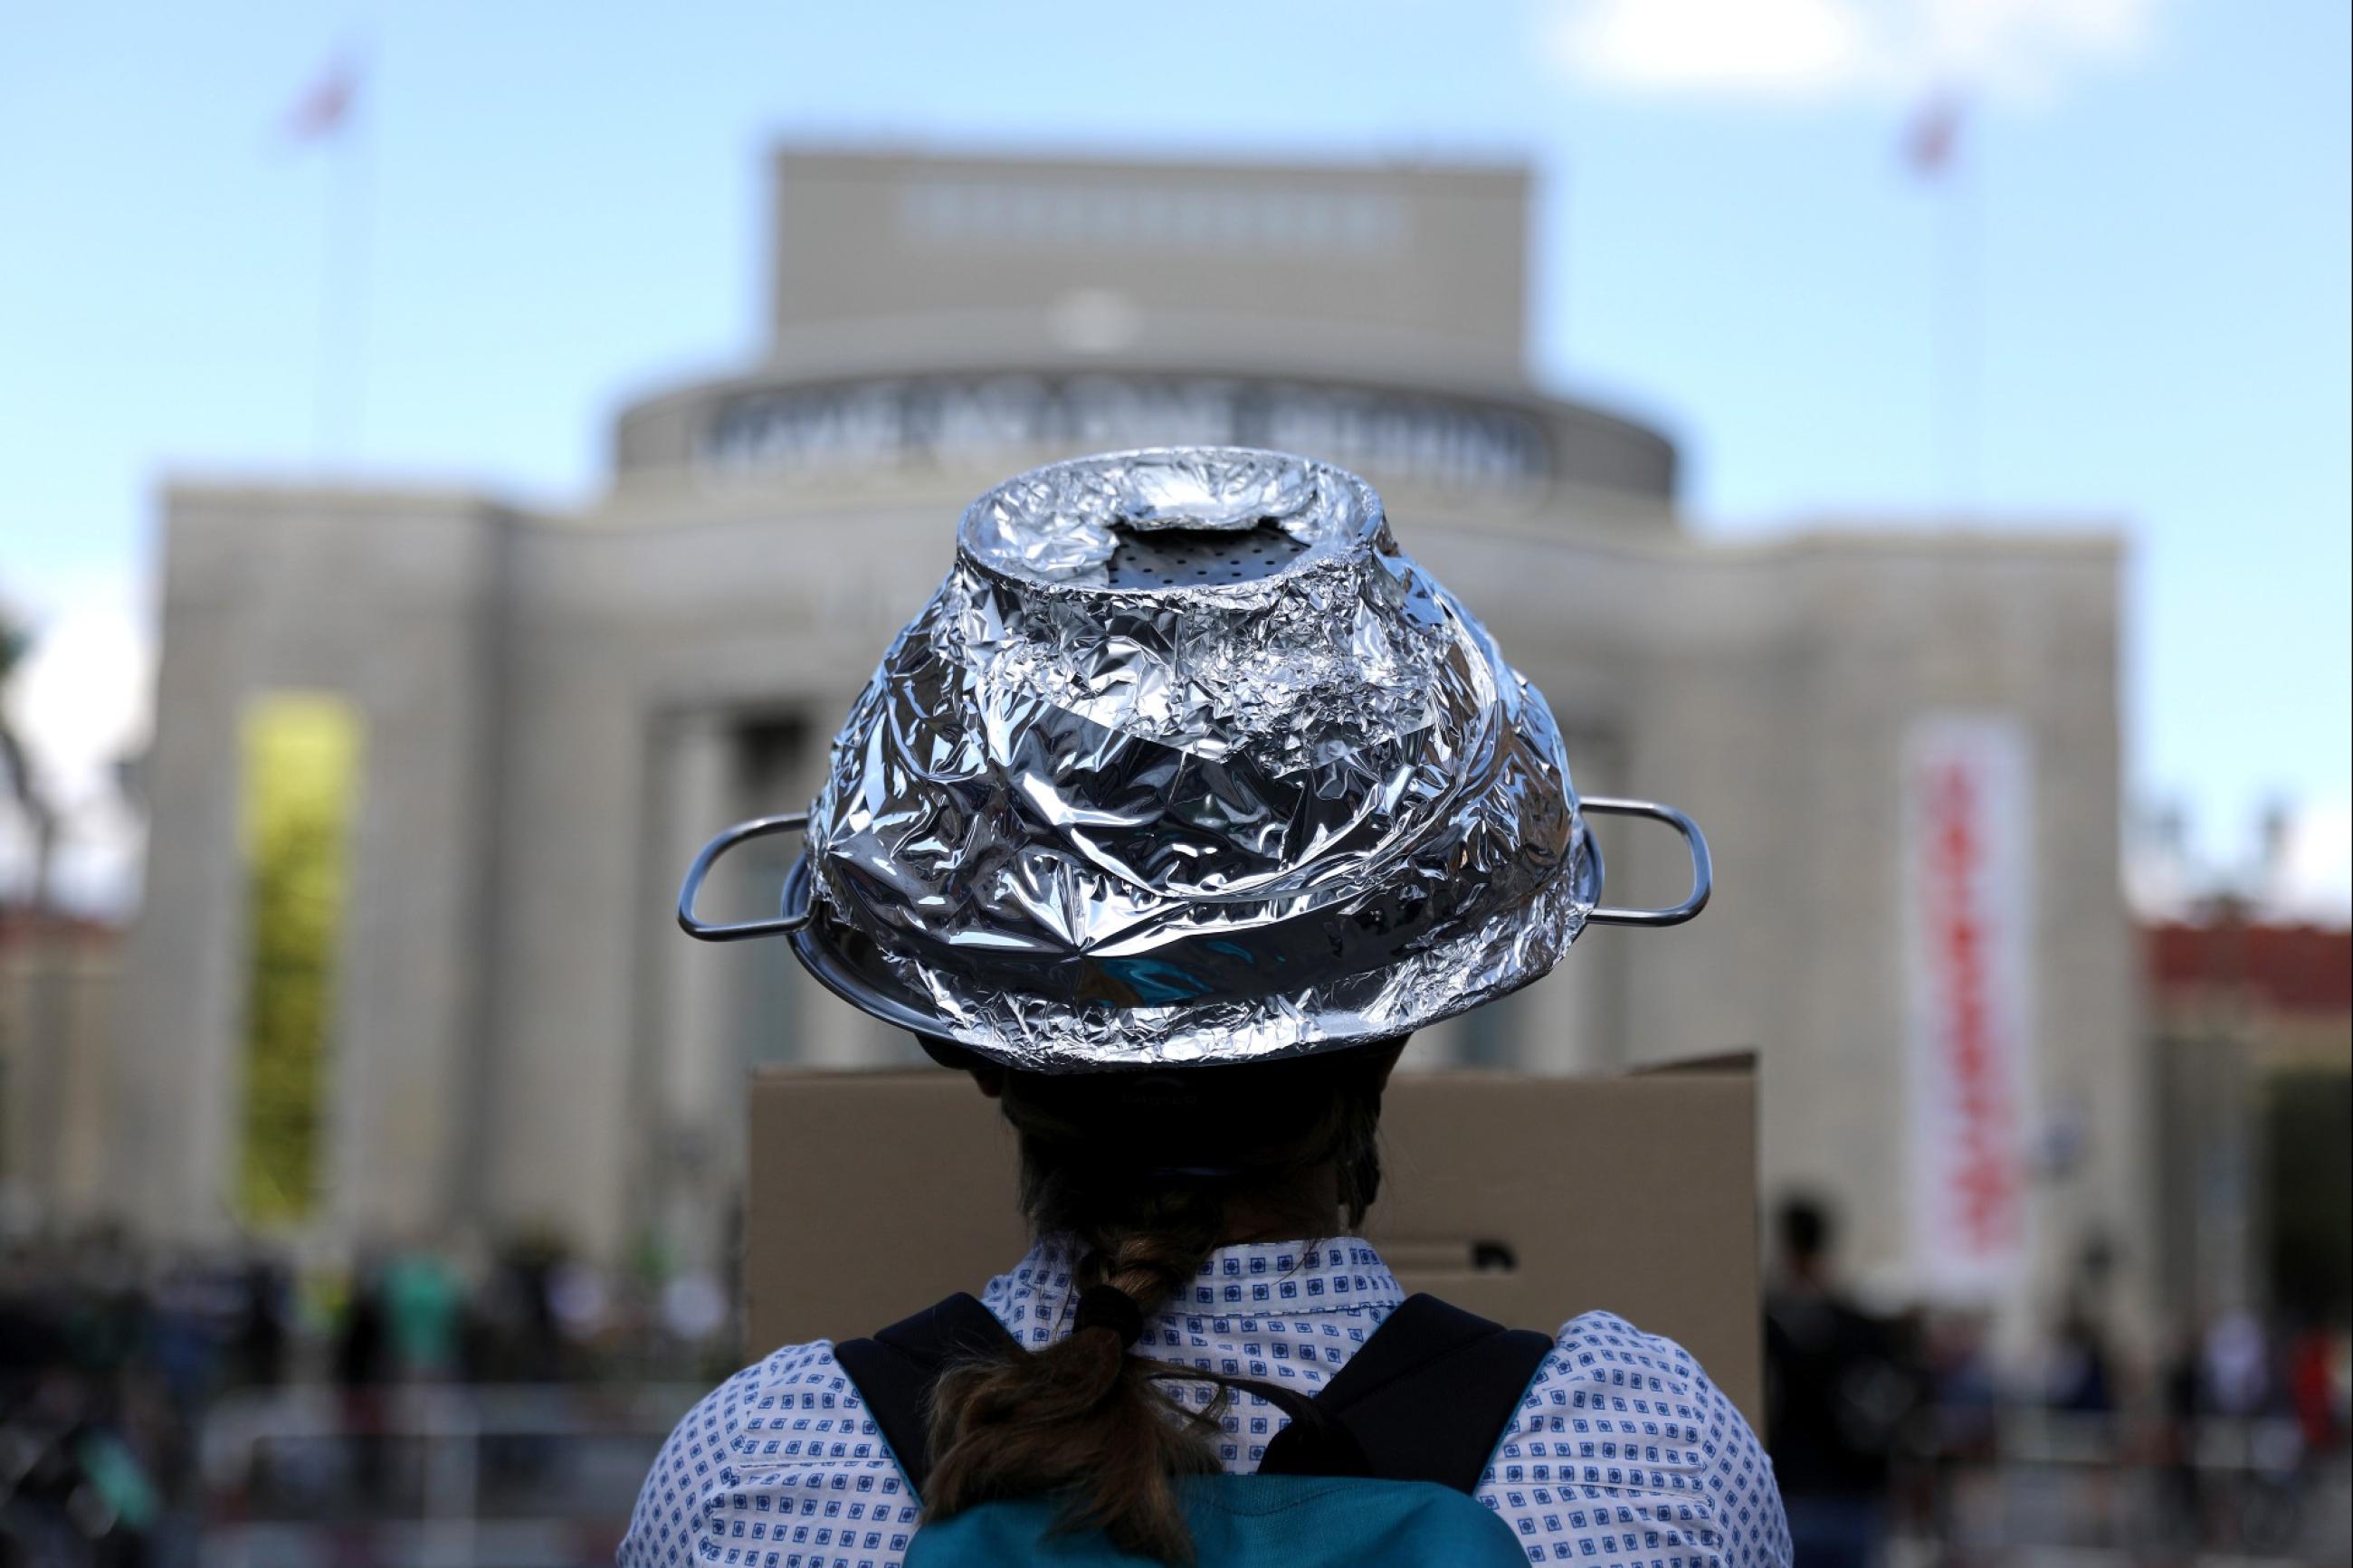 A woman attends a protest of conspiracy theorists and other demonstrators at Rosa Luxemburg Platz, amid the spread of COVID-19, in Berlin, Germany, on May 9, 2020.